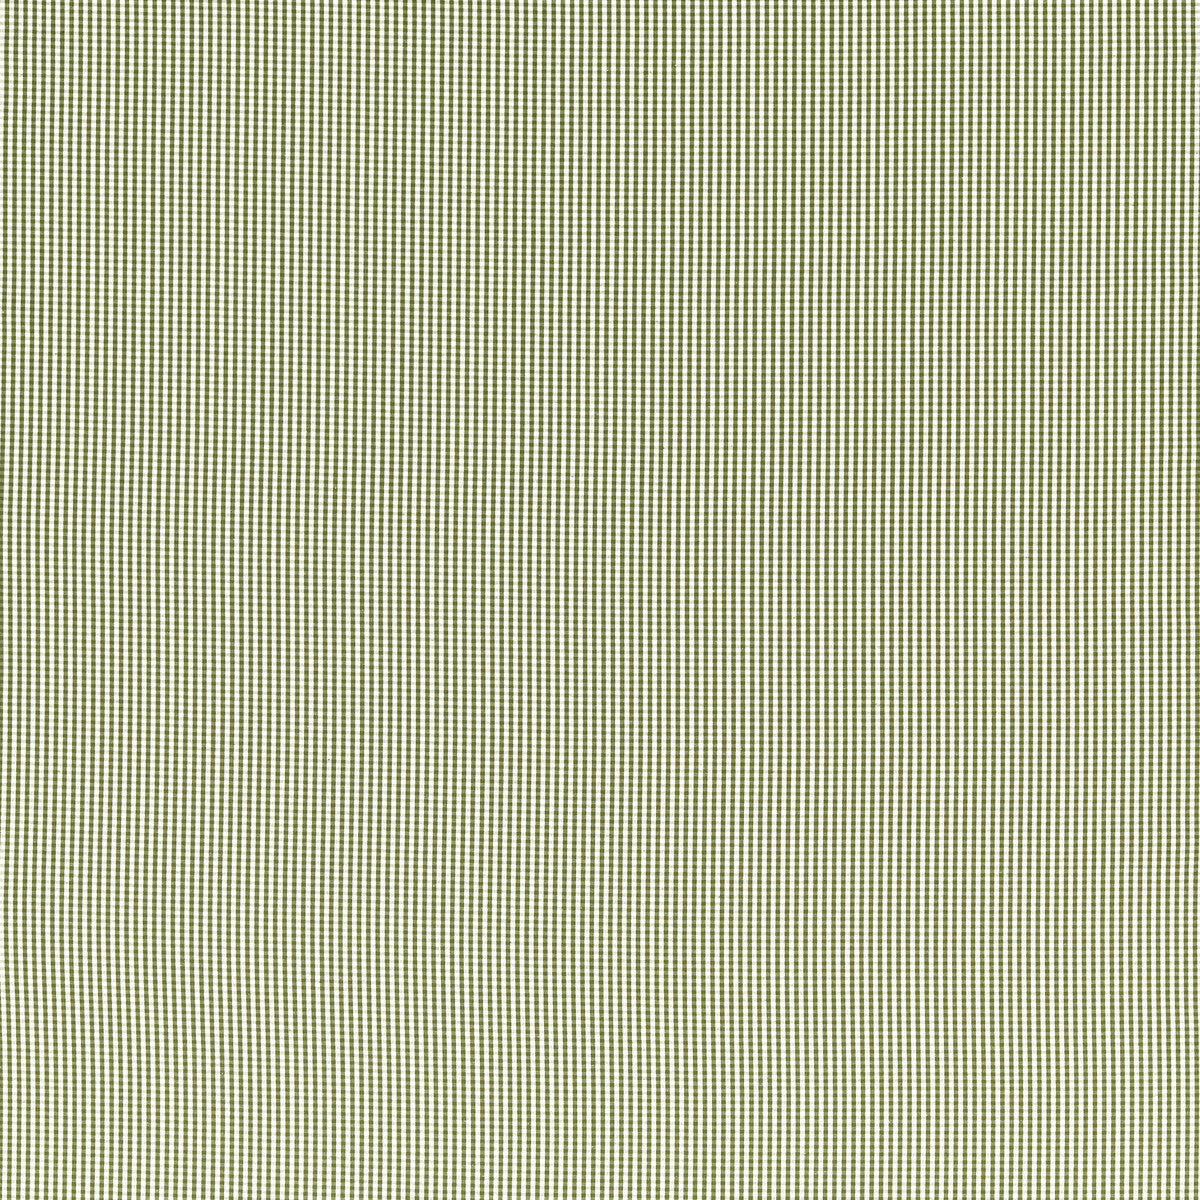 Windsor fabric in sage color - pattern F1505/10.CAC.0 - by Clarke And Clarke in the Clarke &amp; Clarke Edgeworth collection